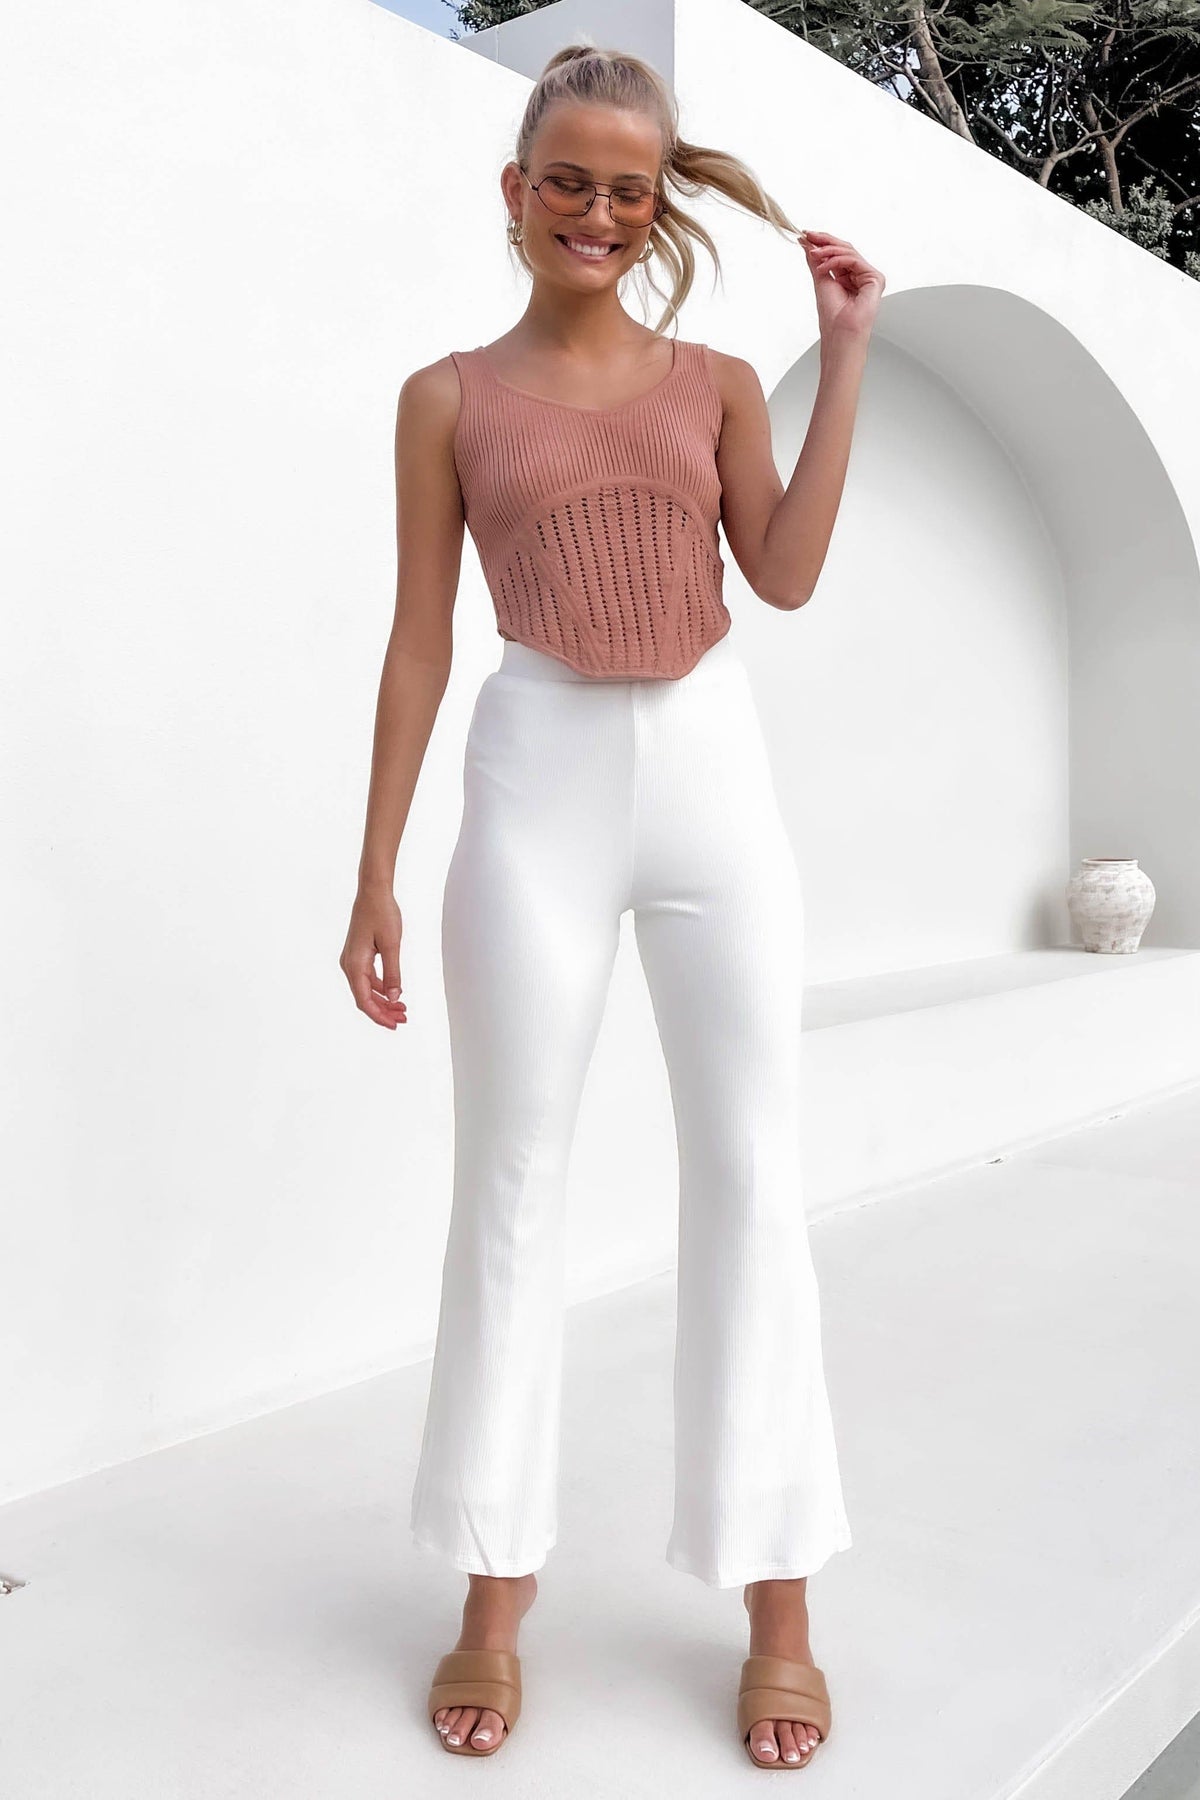 Mantra Top, BASIC TOPS, BASICS, BROWN, CROP TOPS, NEW ARRIVALS, POLYESTER, TOP, TOPS, , -MISHKAH